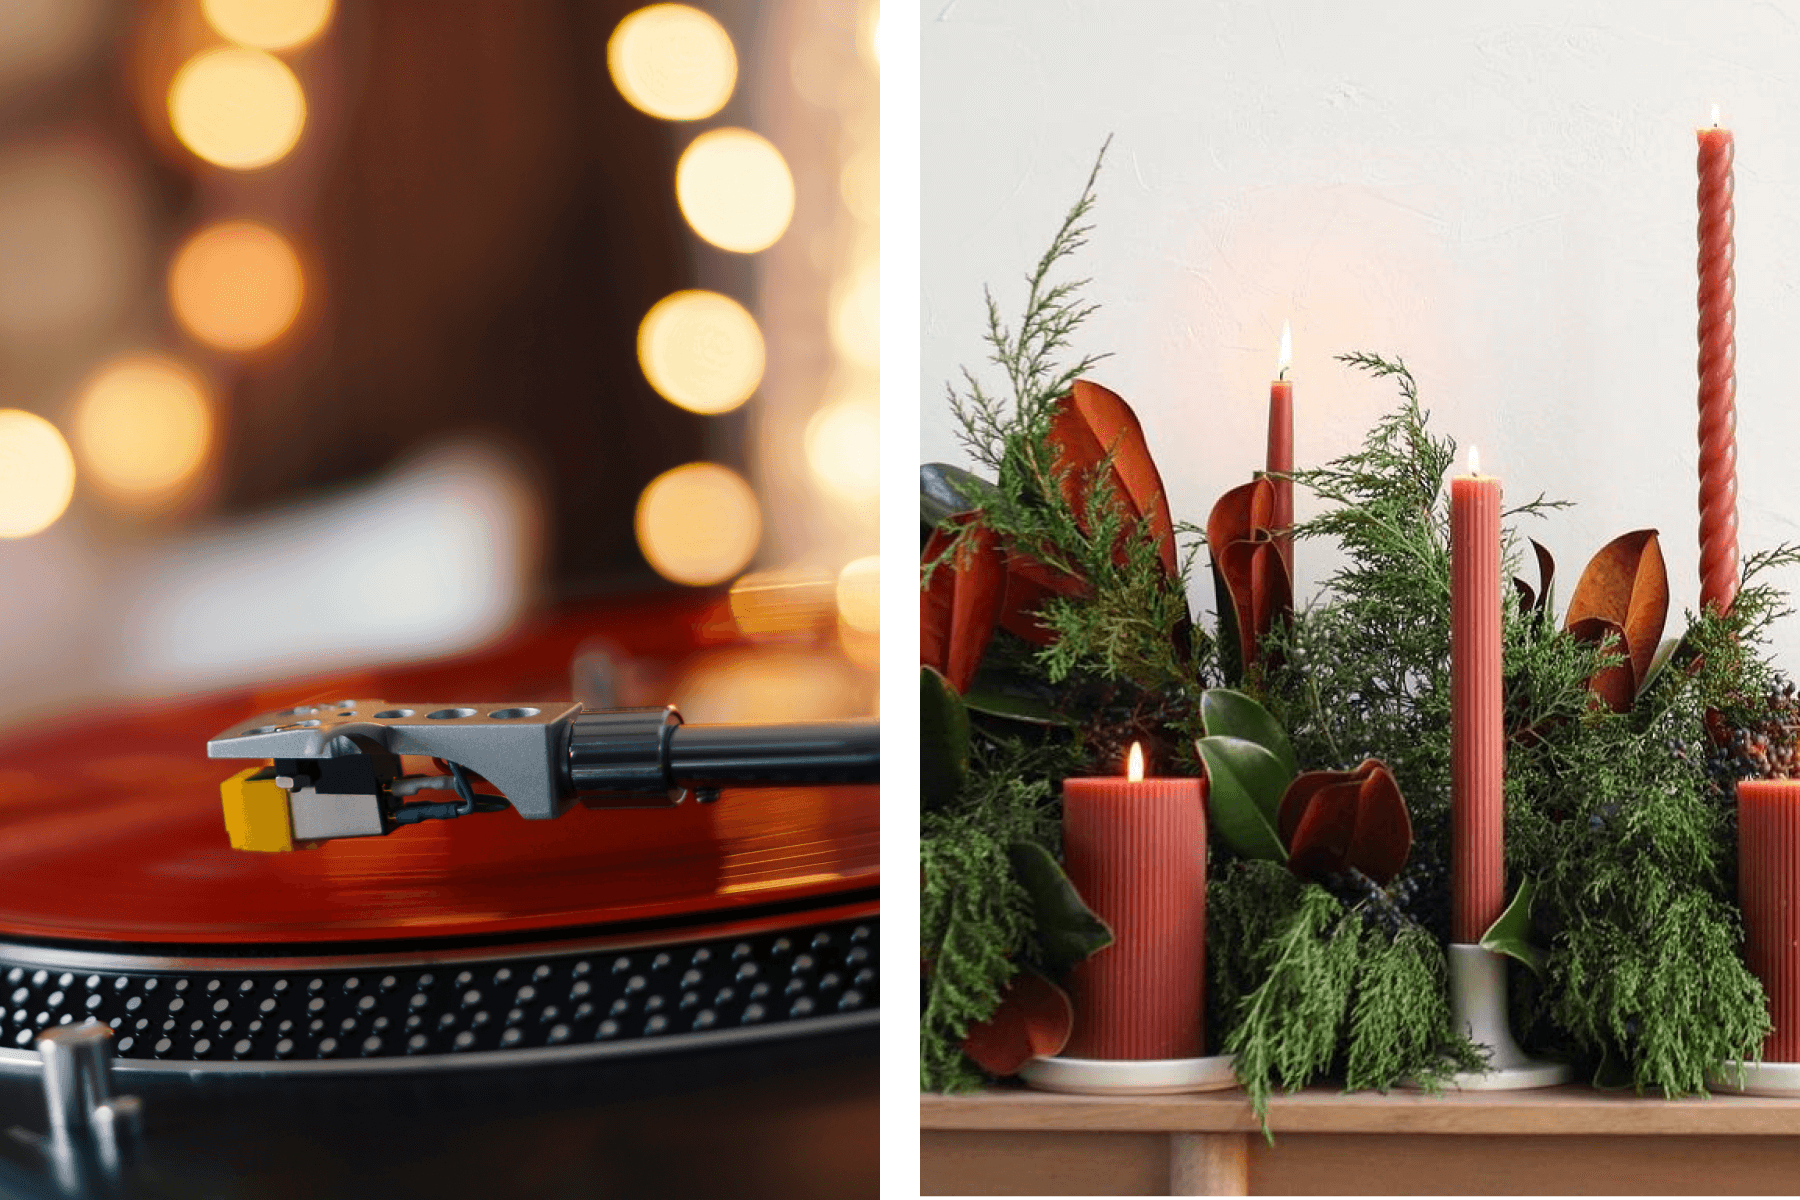 Left: a close up photo of a red record on a player with a soft-focus background; right: a variety of candles and holders surrounded by seasonal greenery.